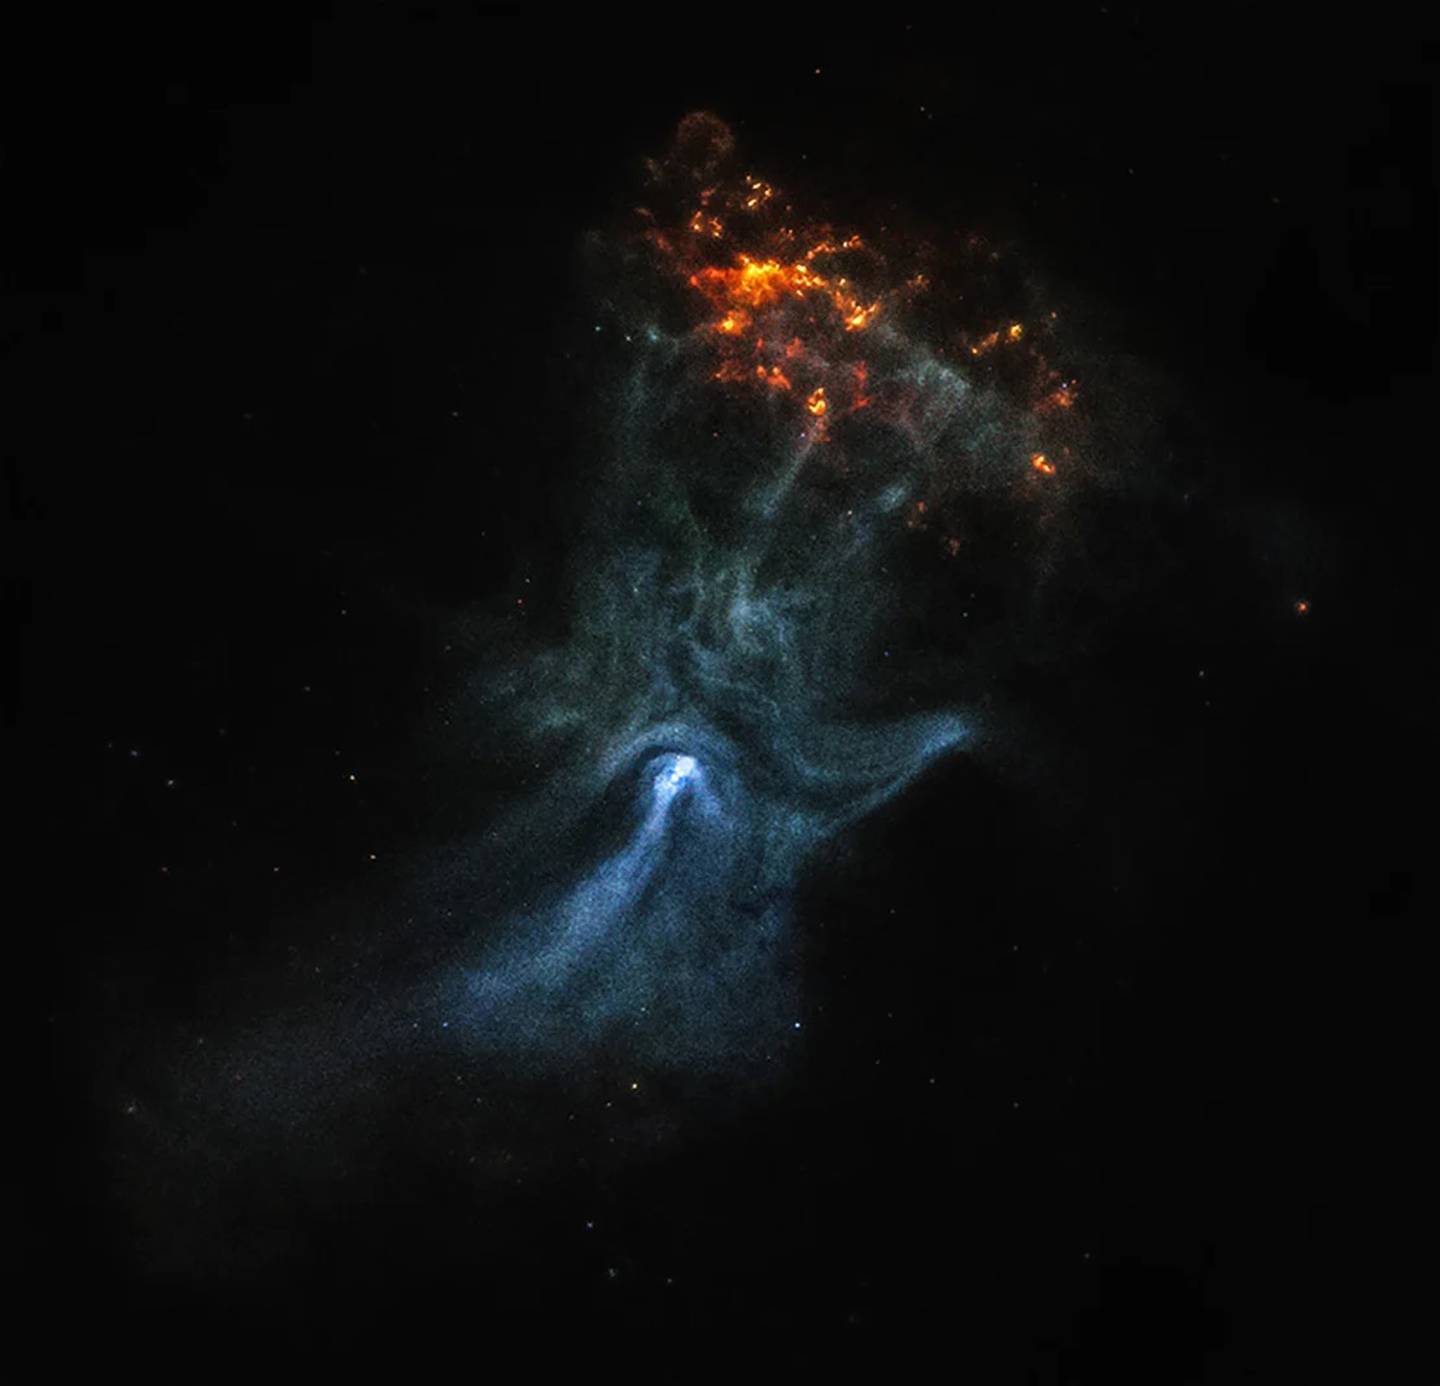 Chandra'S Original Image Of The Nebula Shows The Pulsar, The Bright White Dot Within The &Quot;Palm&Quot;, While The Orange Cloud Is The Remnant Of A Supernova Explosion.  (Credit: Nasa/Msfc)